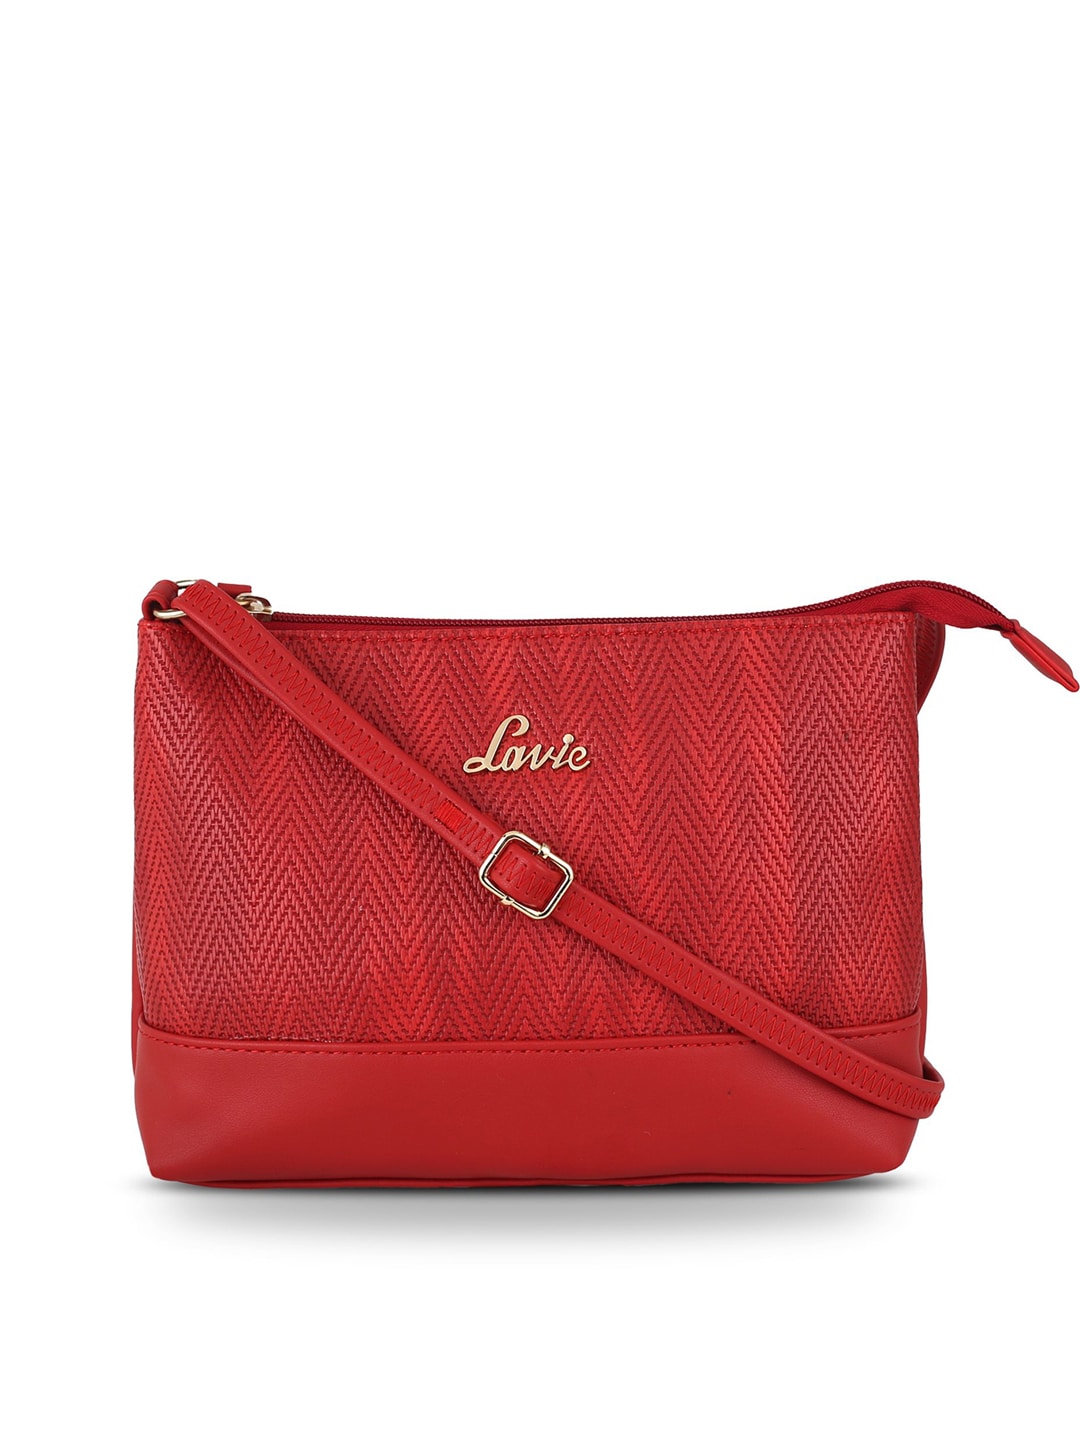 Lavie Red Textured Sling Bag Price in India